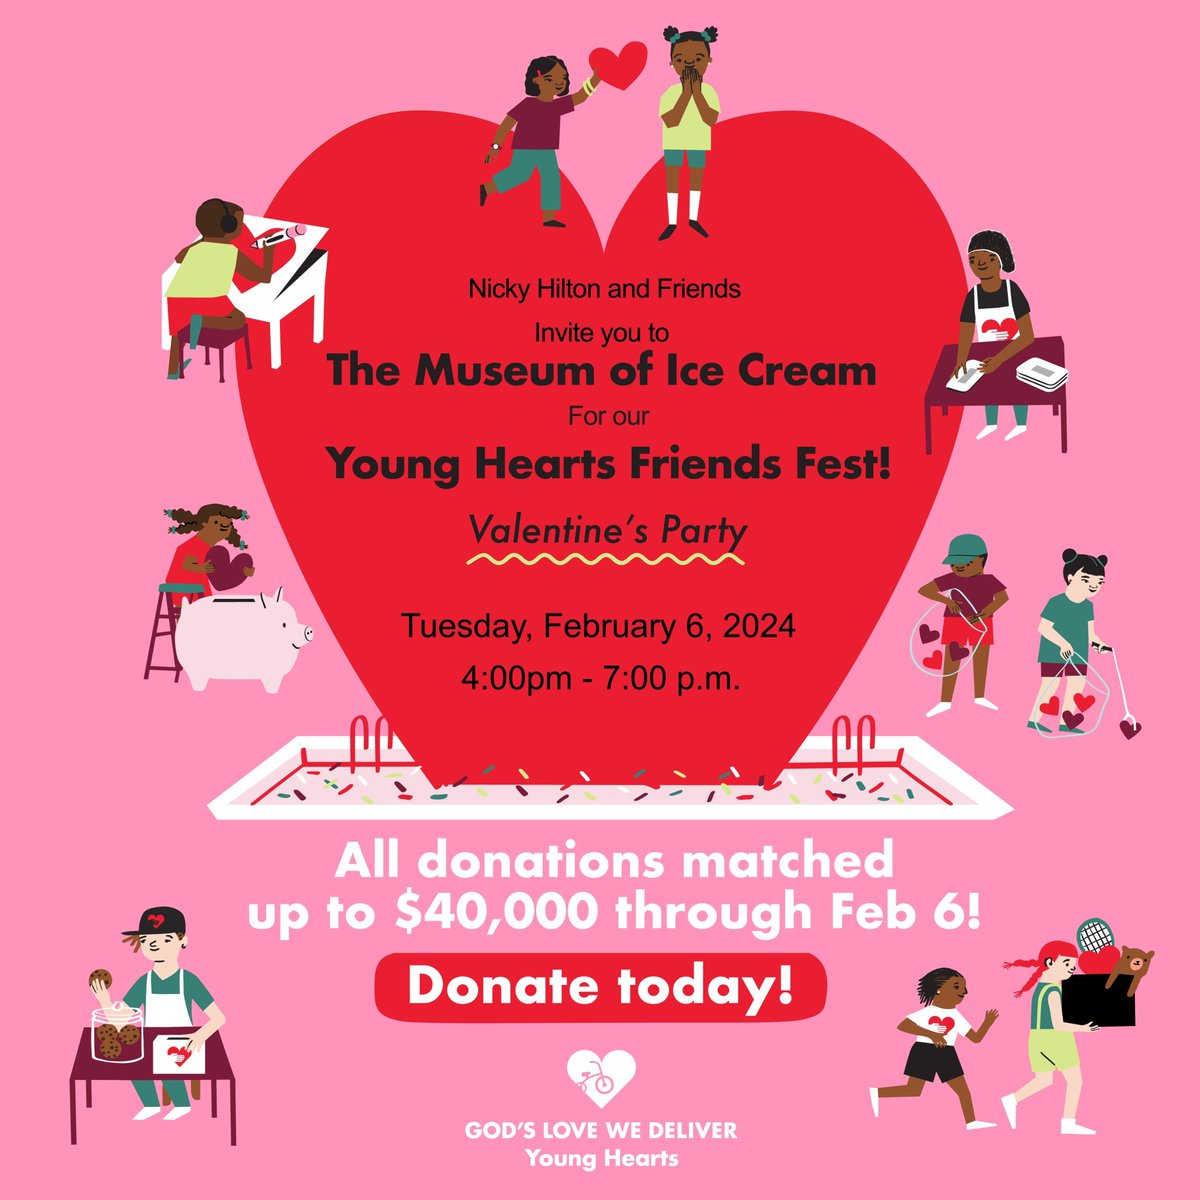 #NYC Hope to see you at our @godslovenyc Valentine’s Day party at the Museum of Ice Cream next week- Feb 6th! 💘🍦 Going to be a wonderful event for a wonderful cause! Tix avail: tinyurl.com/yc82cdkz